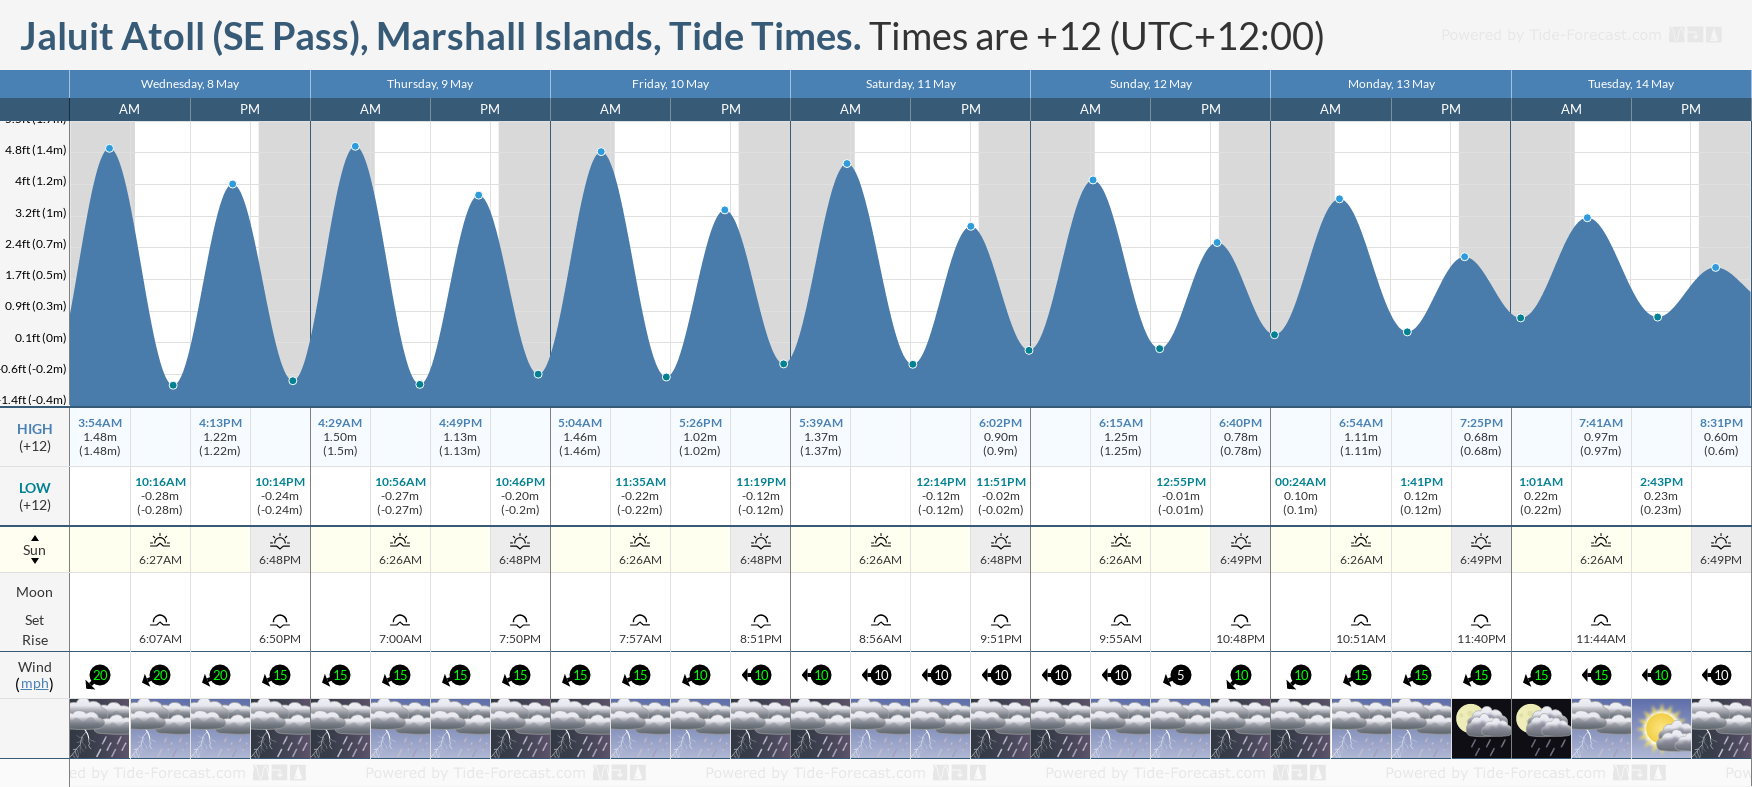 Jaluit Atoll (SE Pass), Marshall Islands Tide Chart including high and low tide tide times for the next 7 days